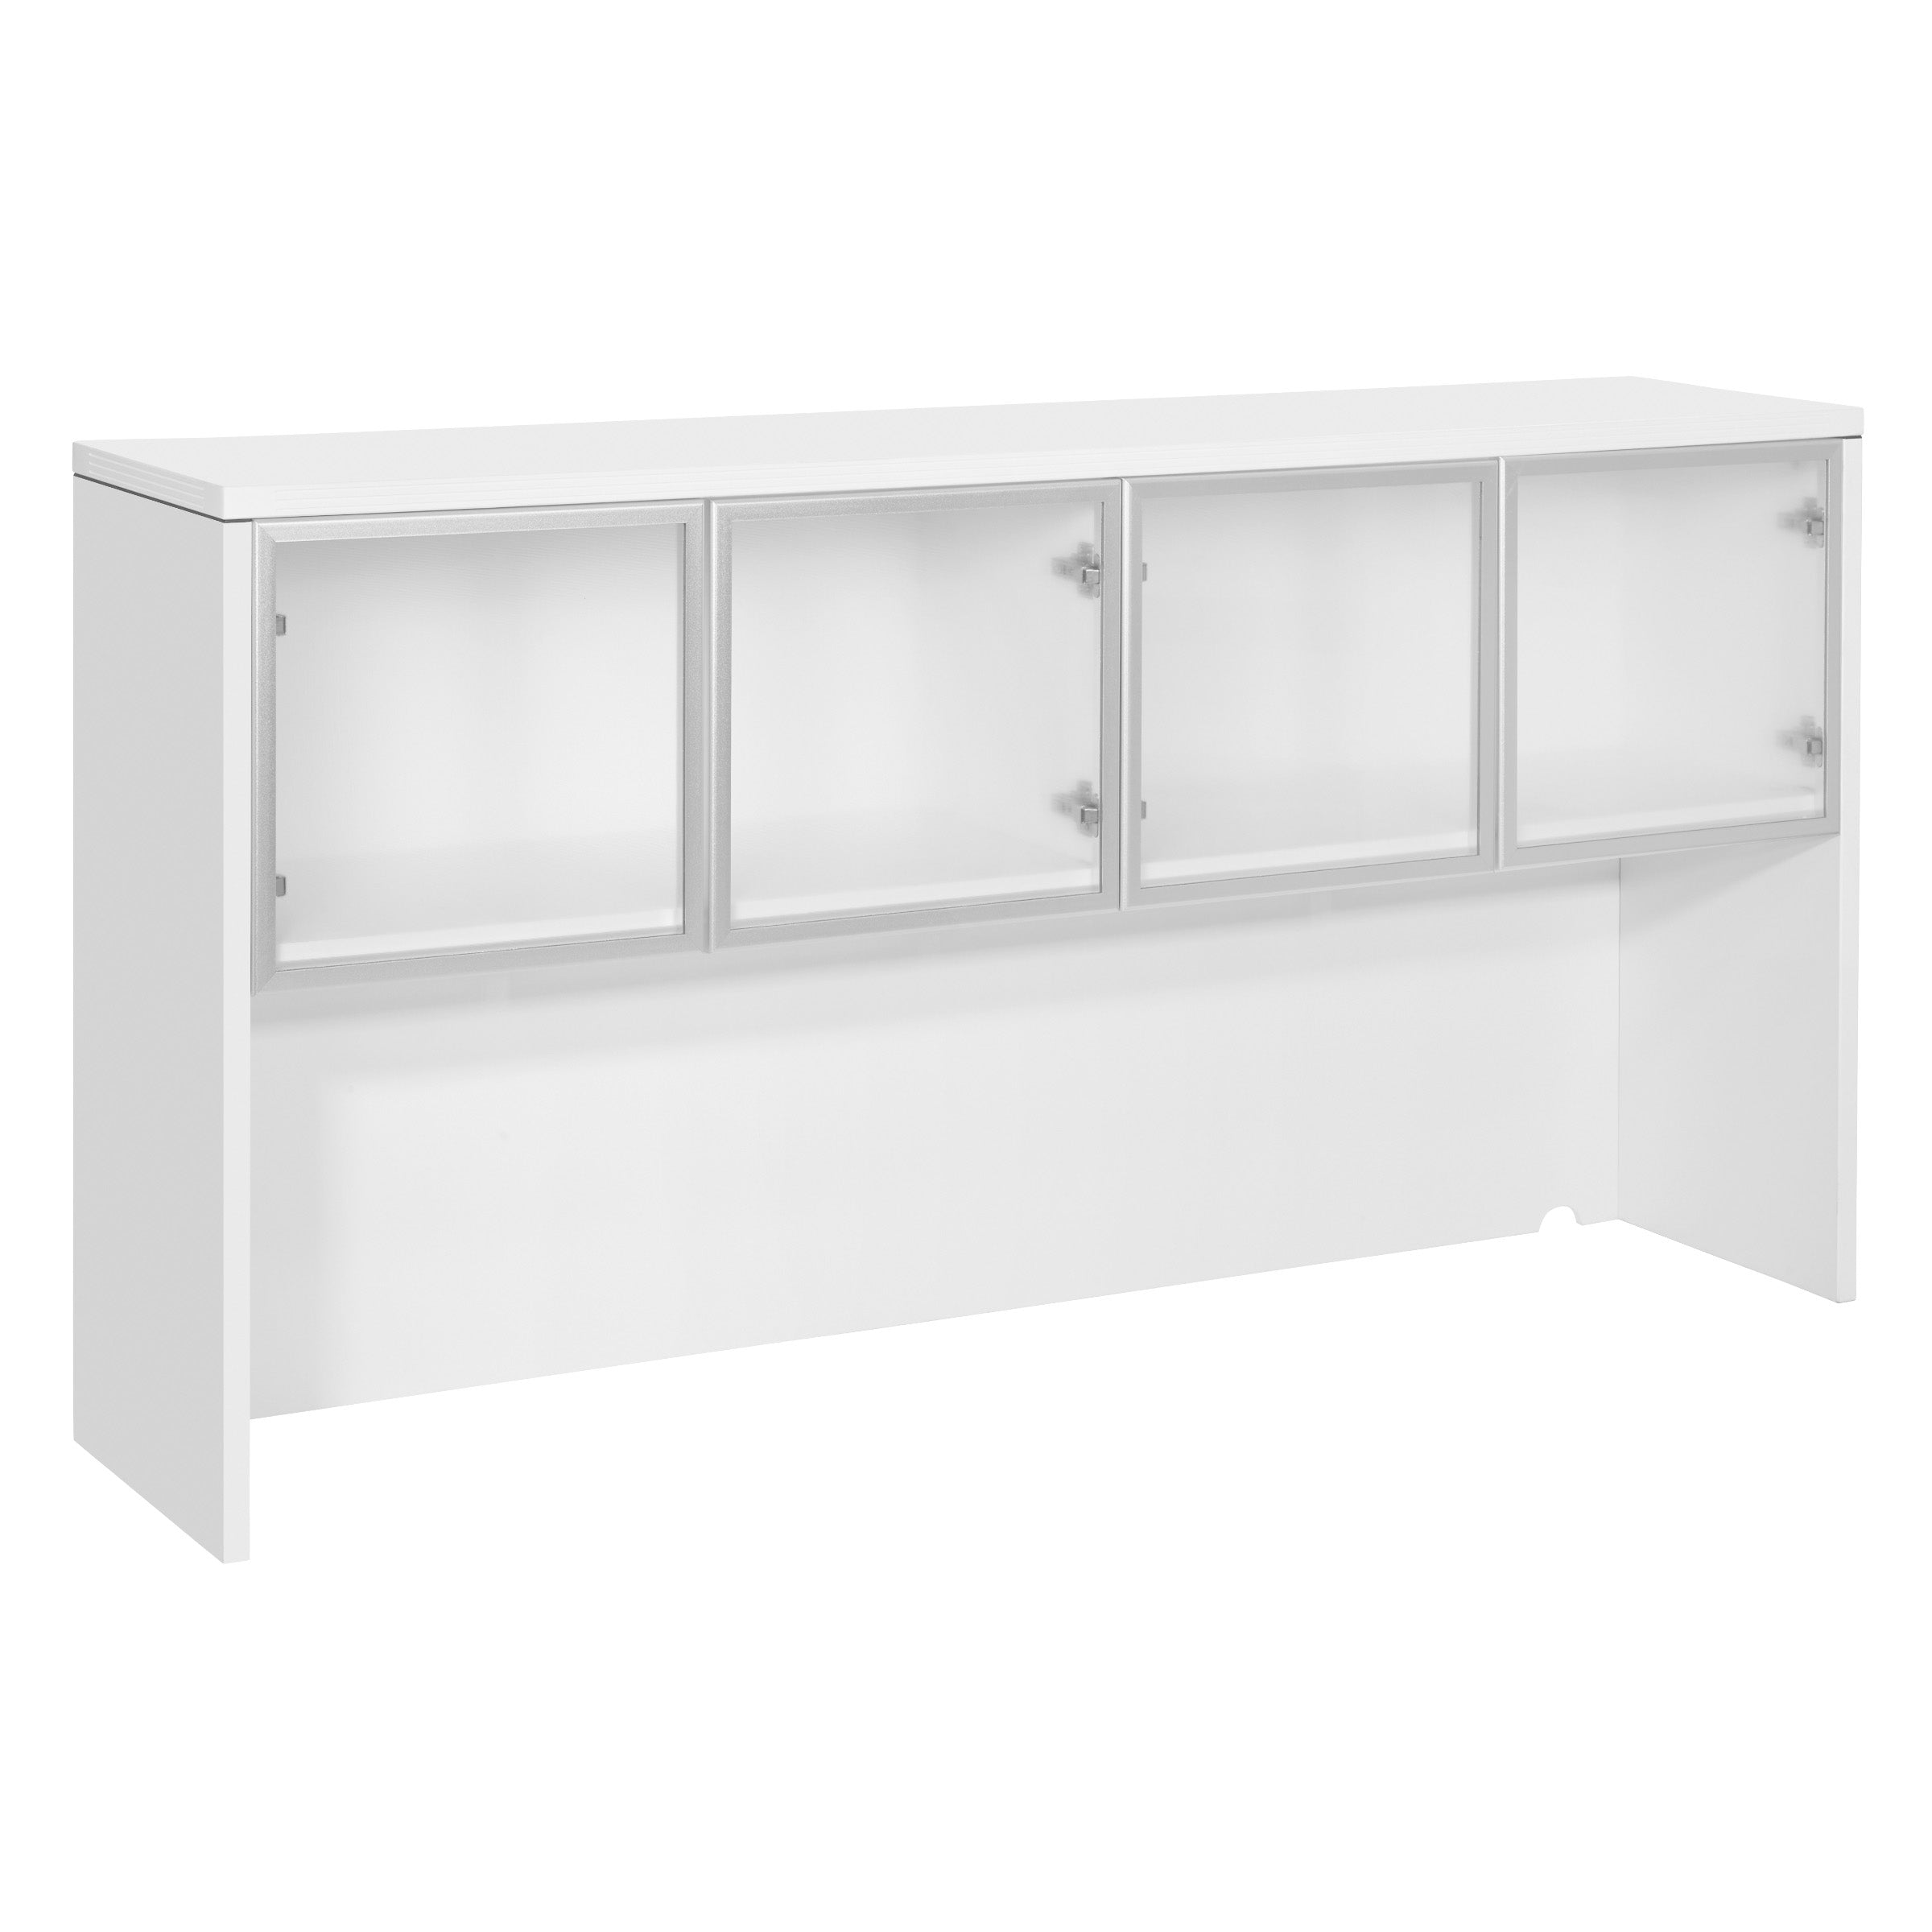 NAP42 - Napa Series Hutch with Glass Doors/Aluminum Trim by OSP